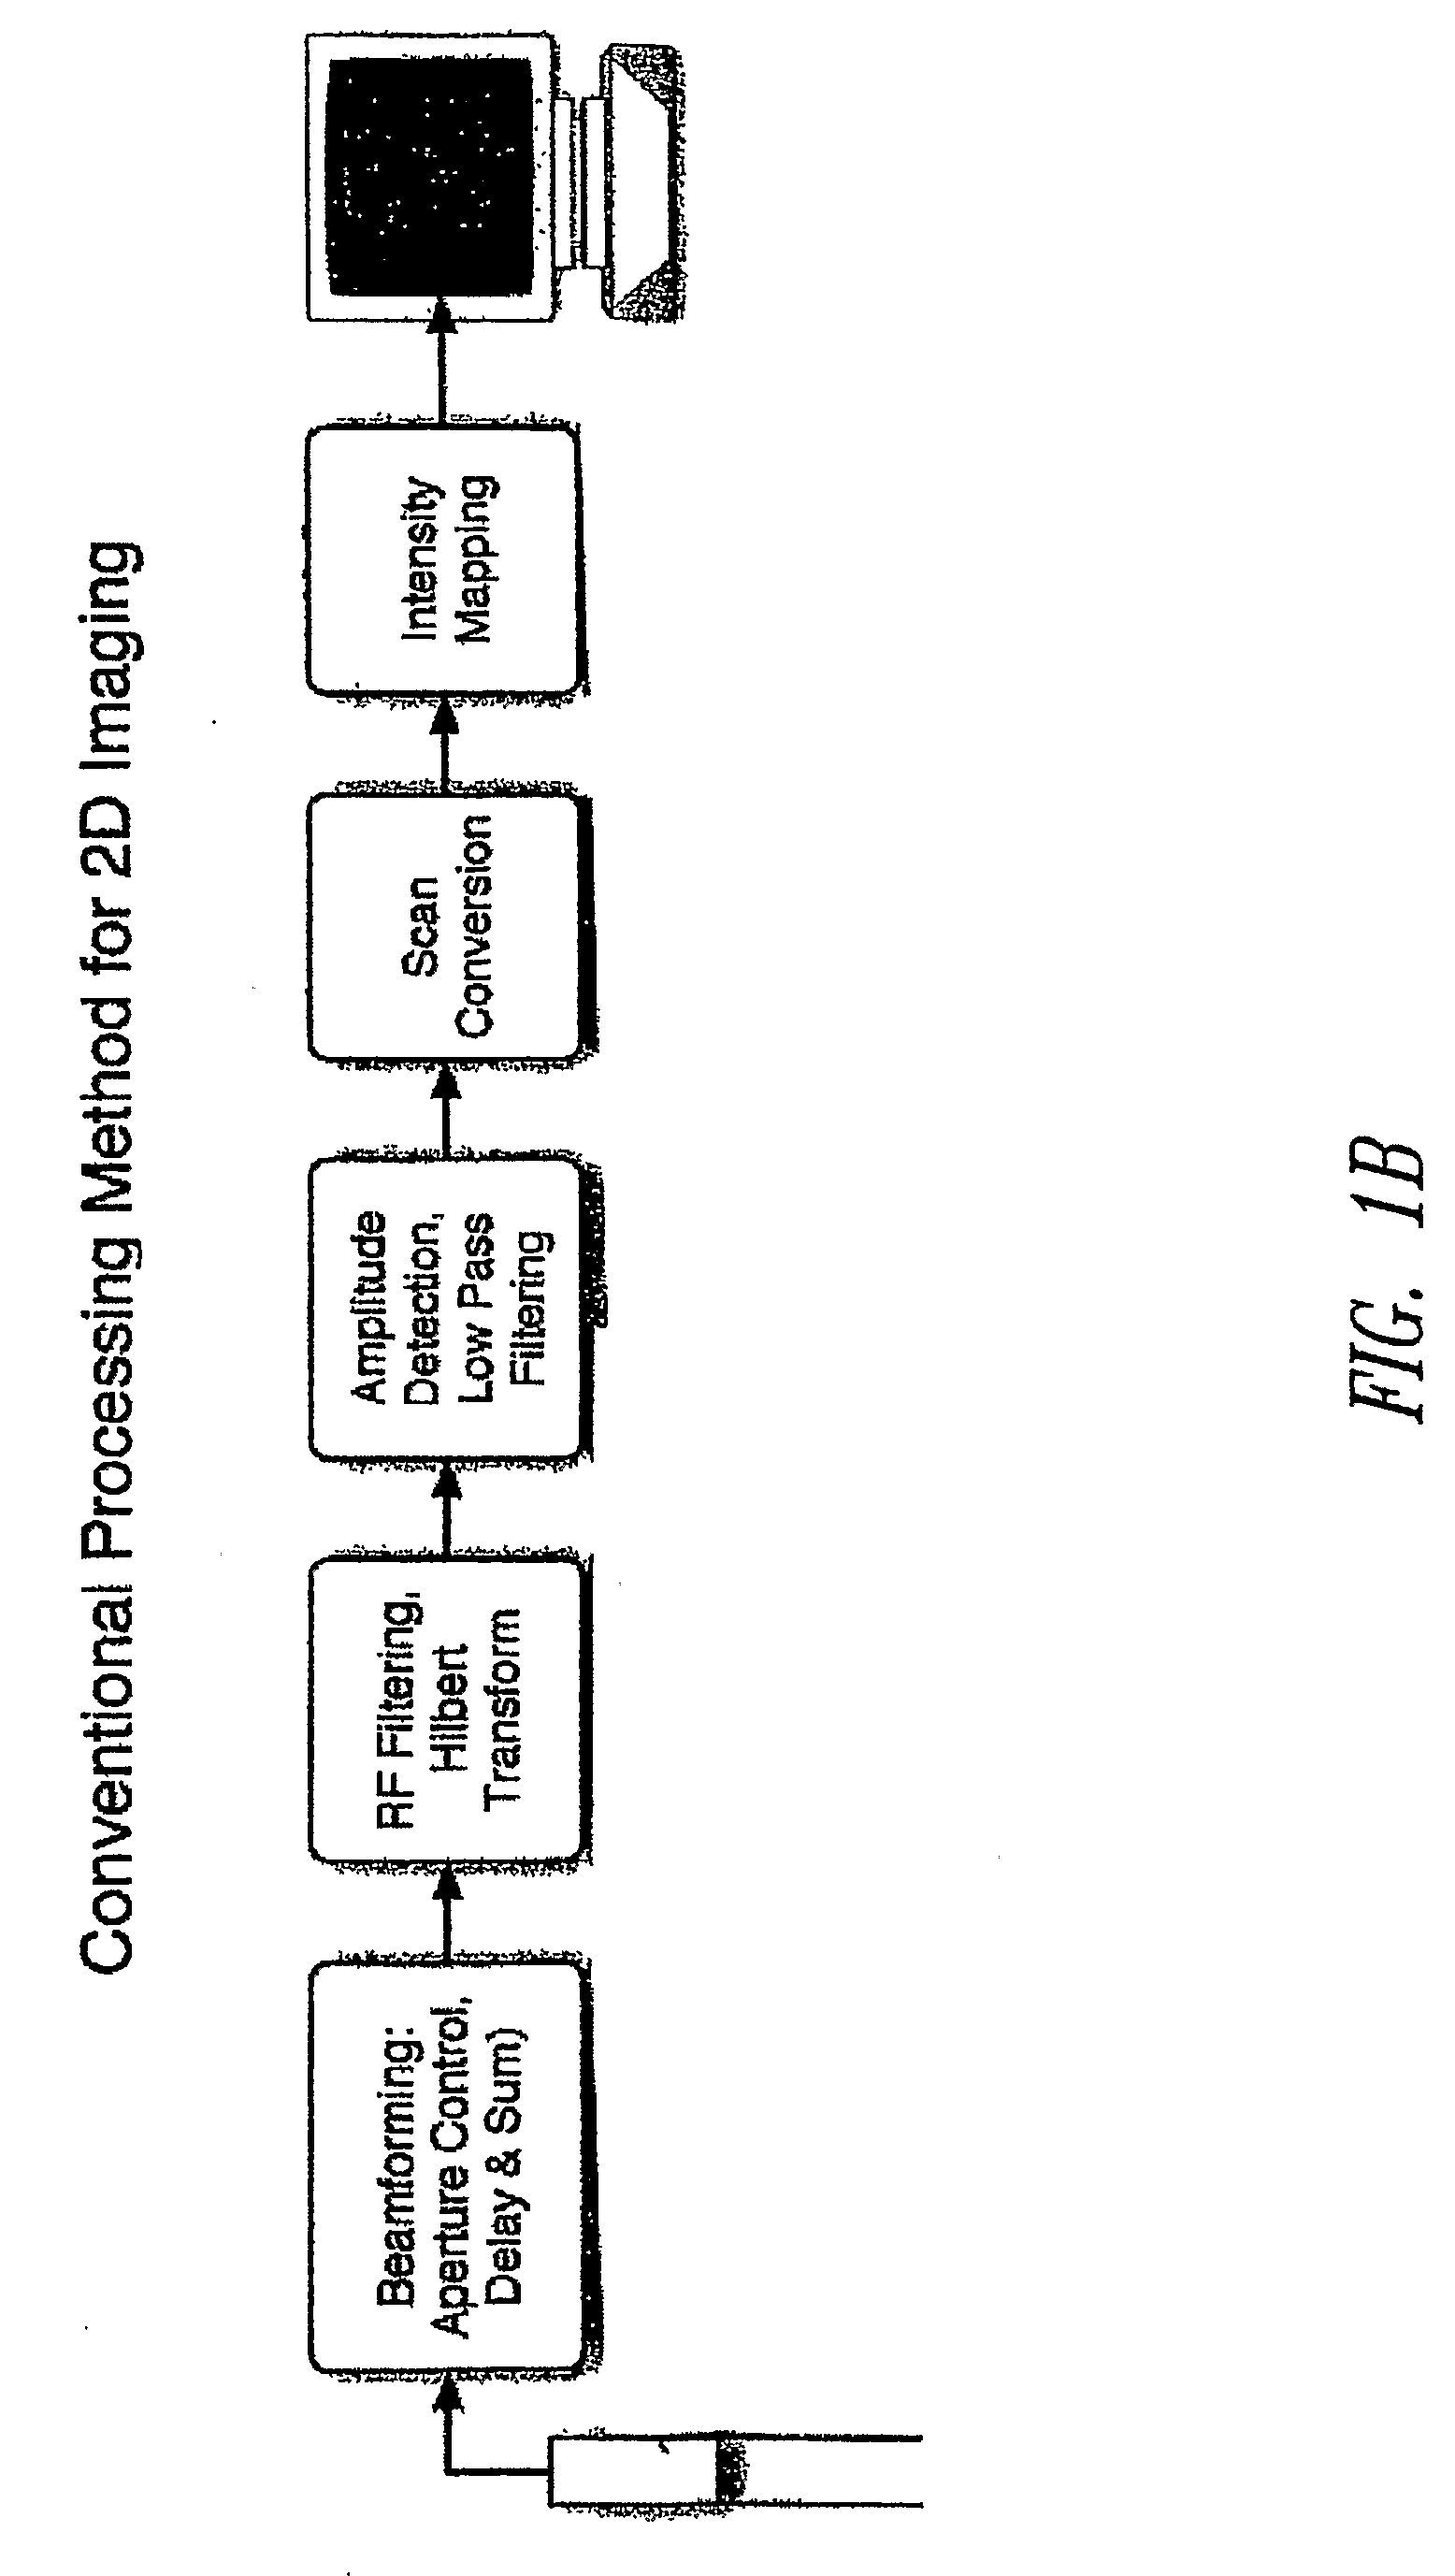 Ultrasound imaging system with pixel oriented processing